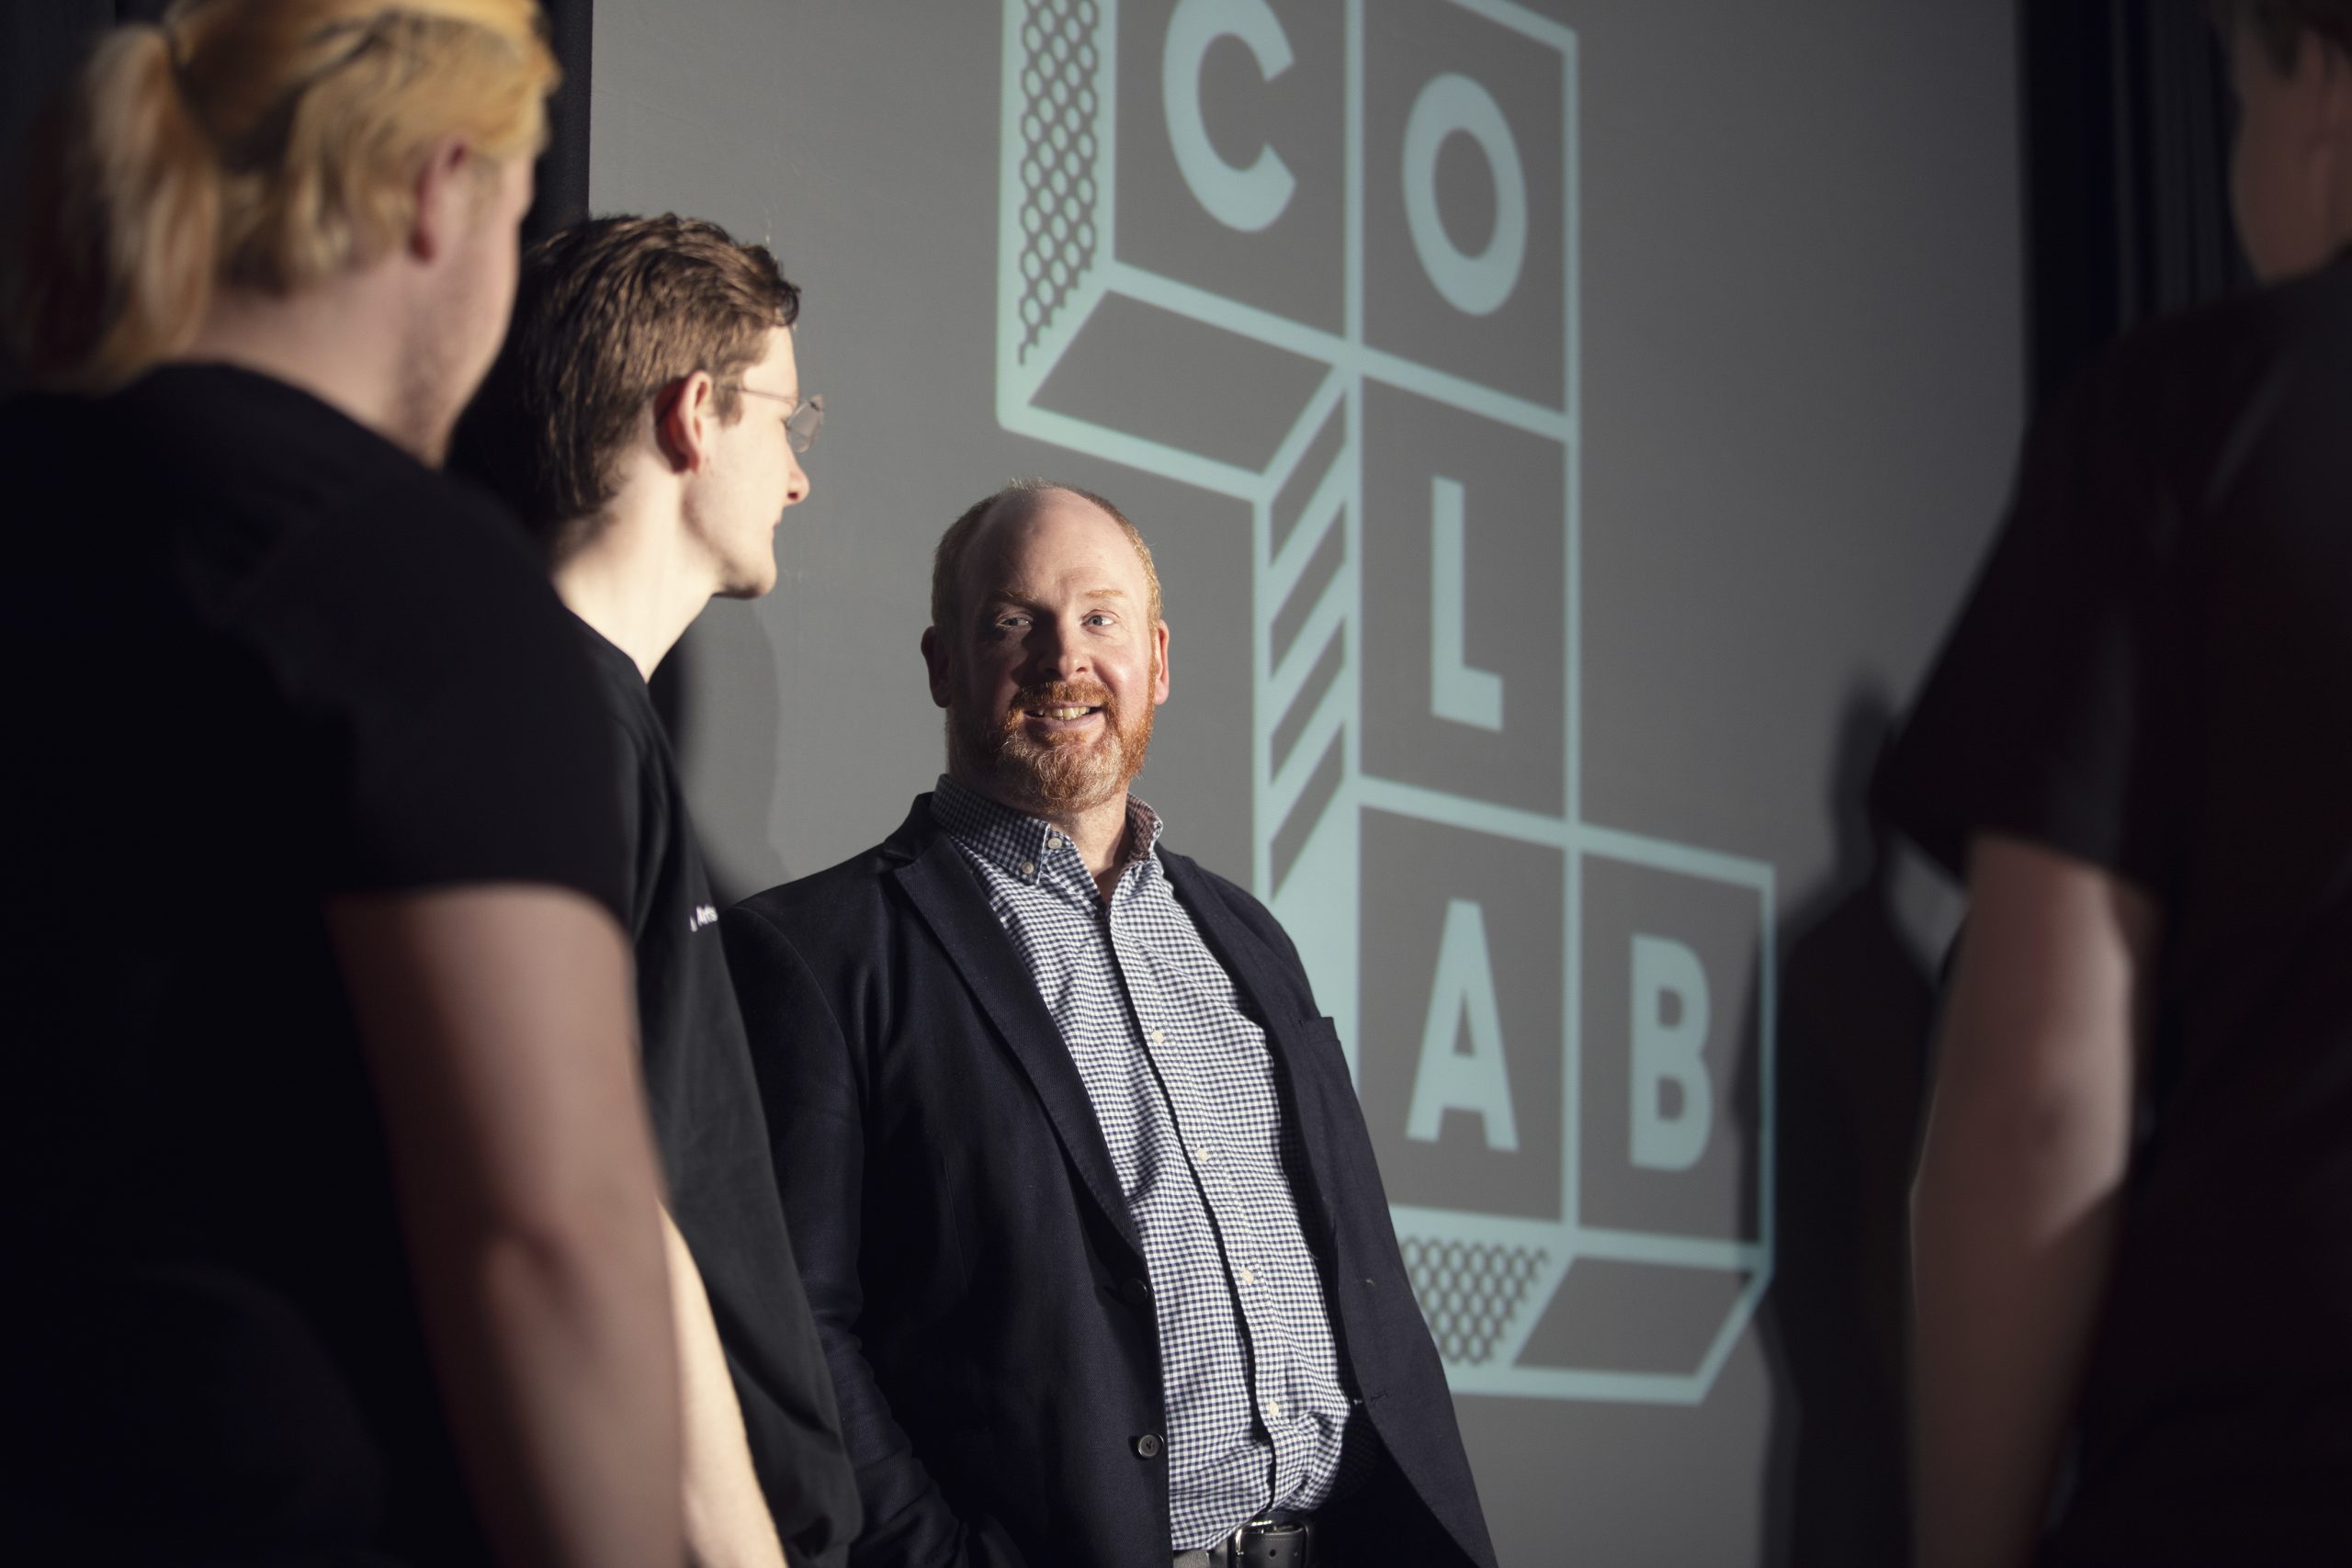 Man with beard in checked shirt and blazer in front of screen with CoLab written within geometric shape. Man is surrounded by other people